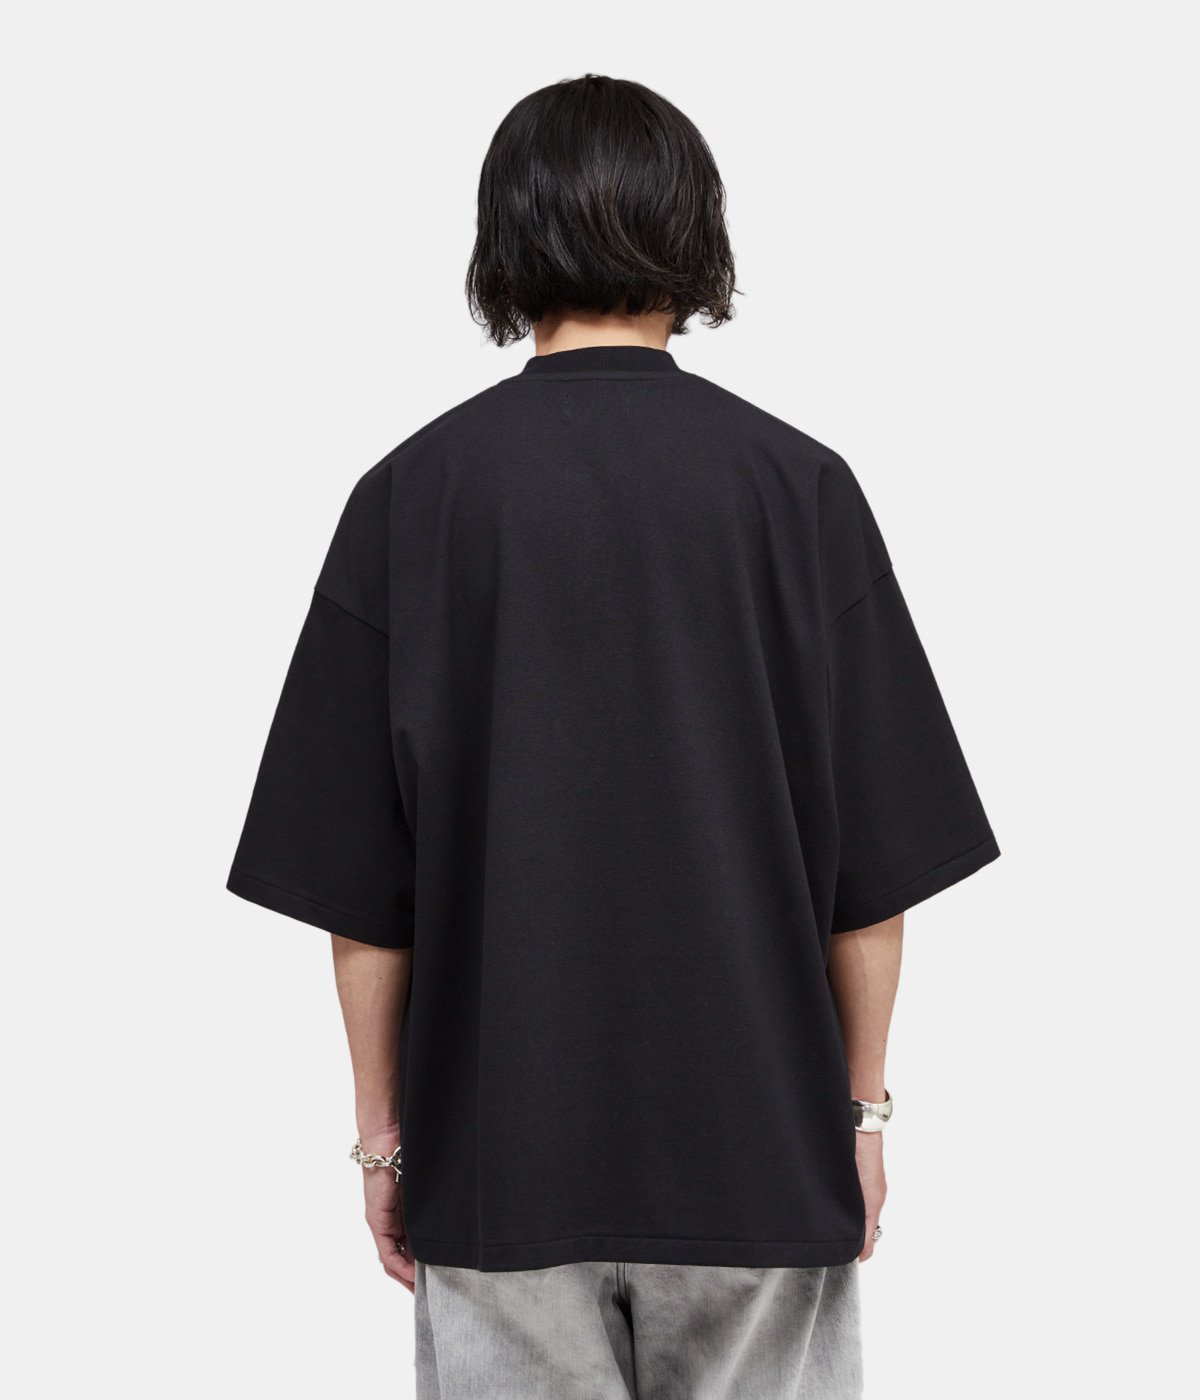 Henry neck SS T-shirt | PORT BY ARK(ポートバイアーク) / トップス